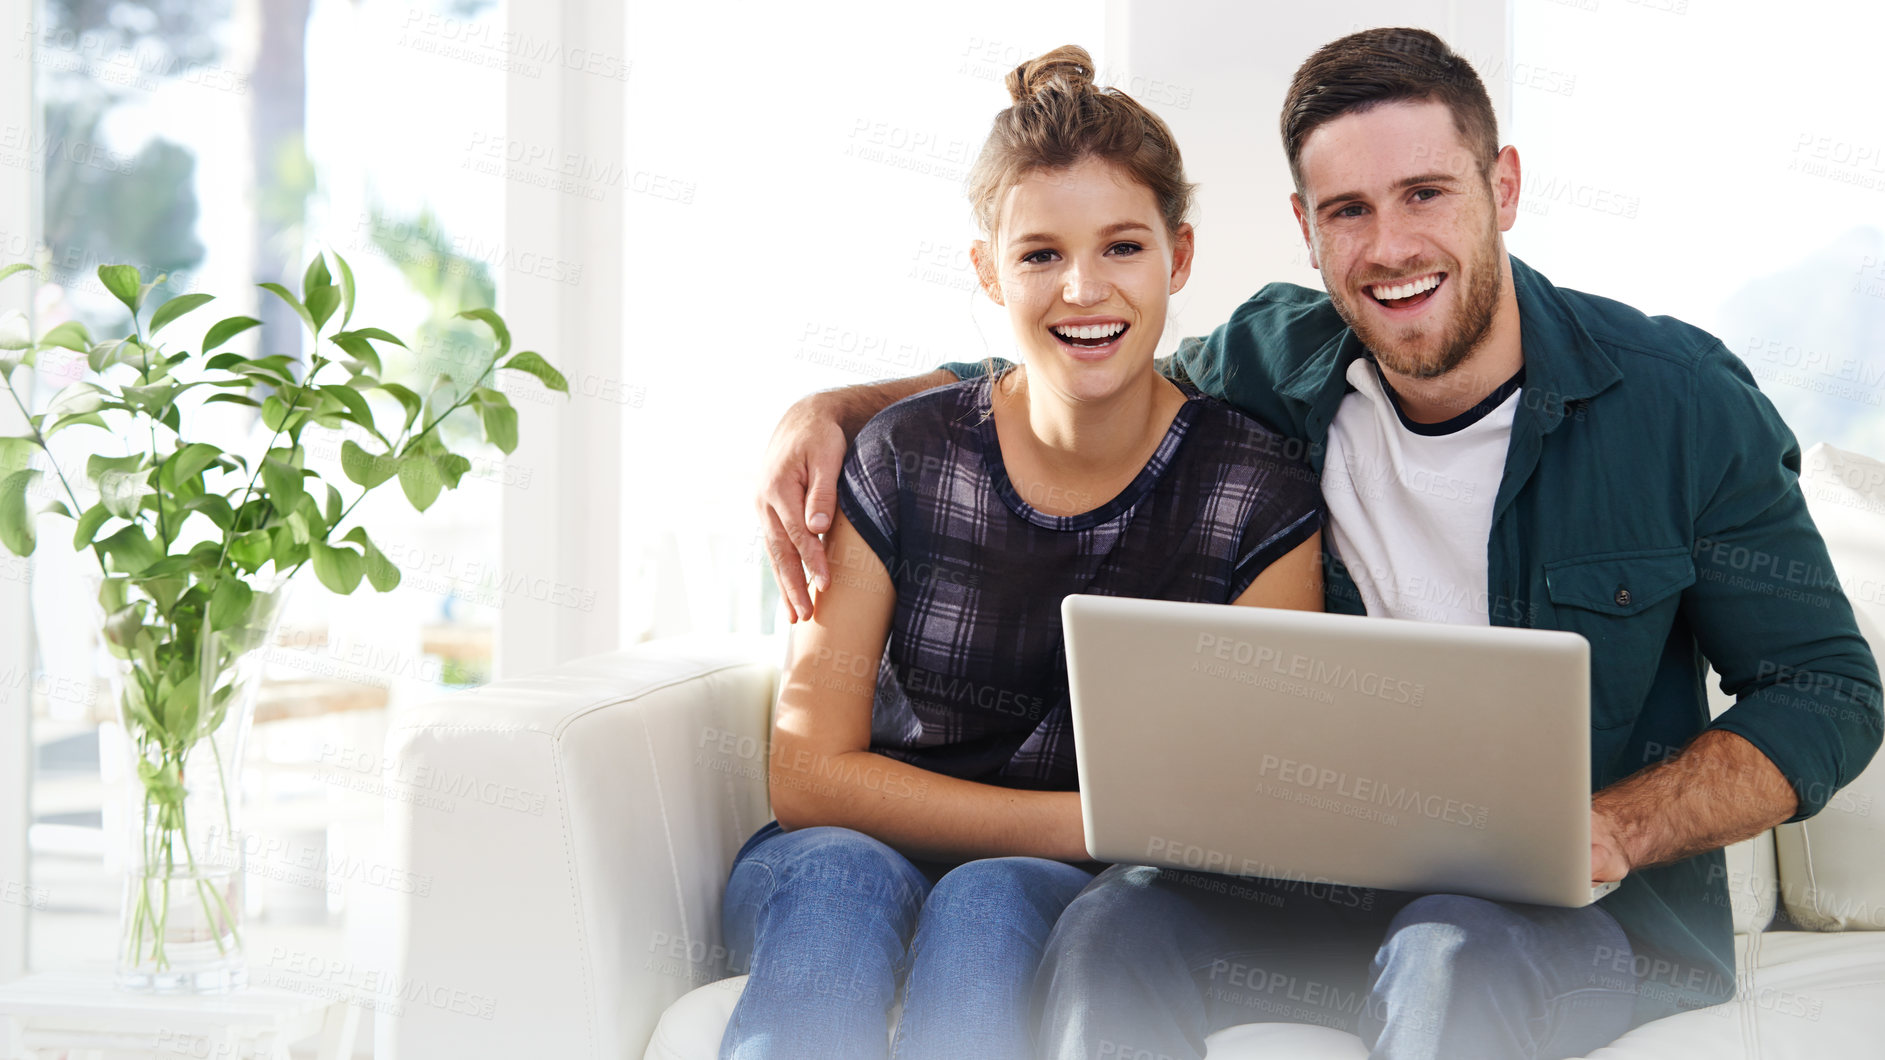 Buy stock photo Portrait of a happy young couple using a laptop while relaxing at home together